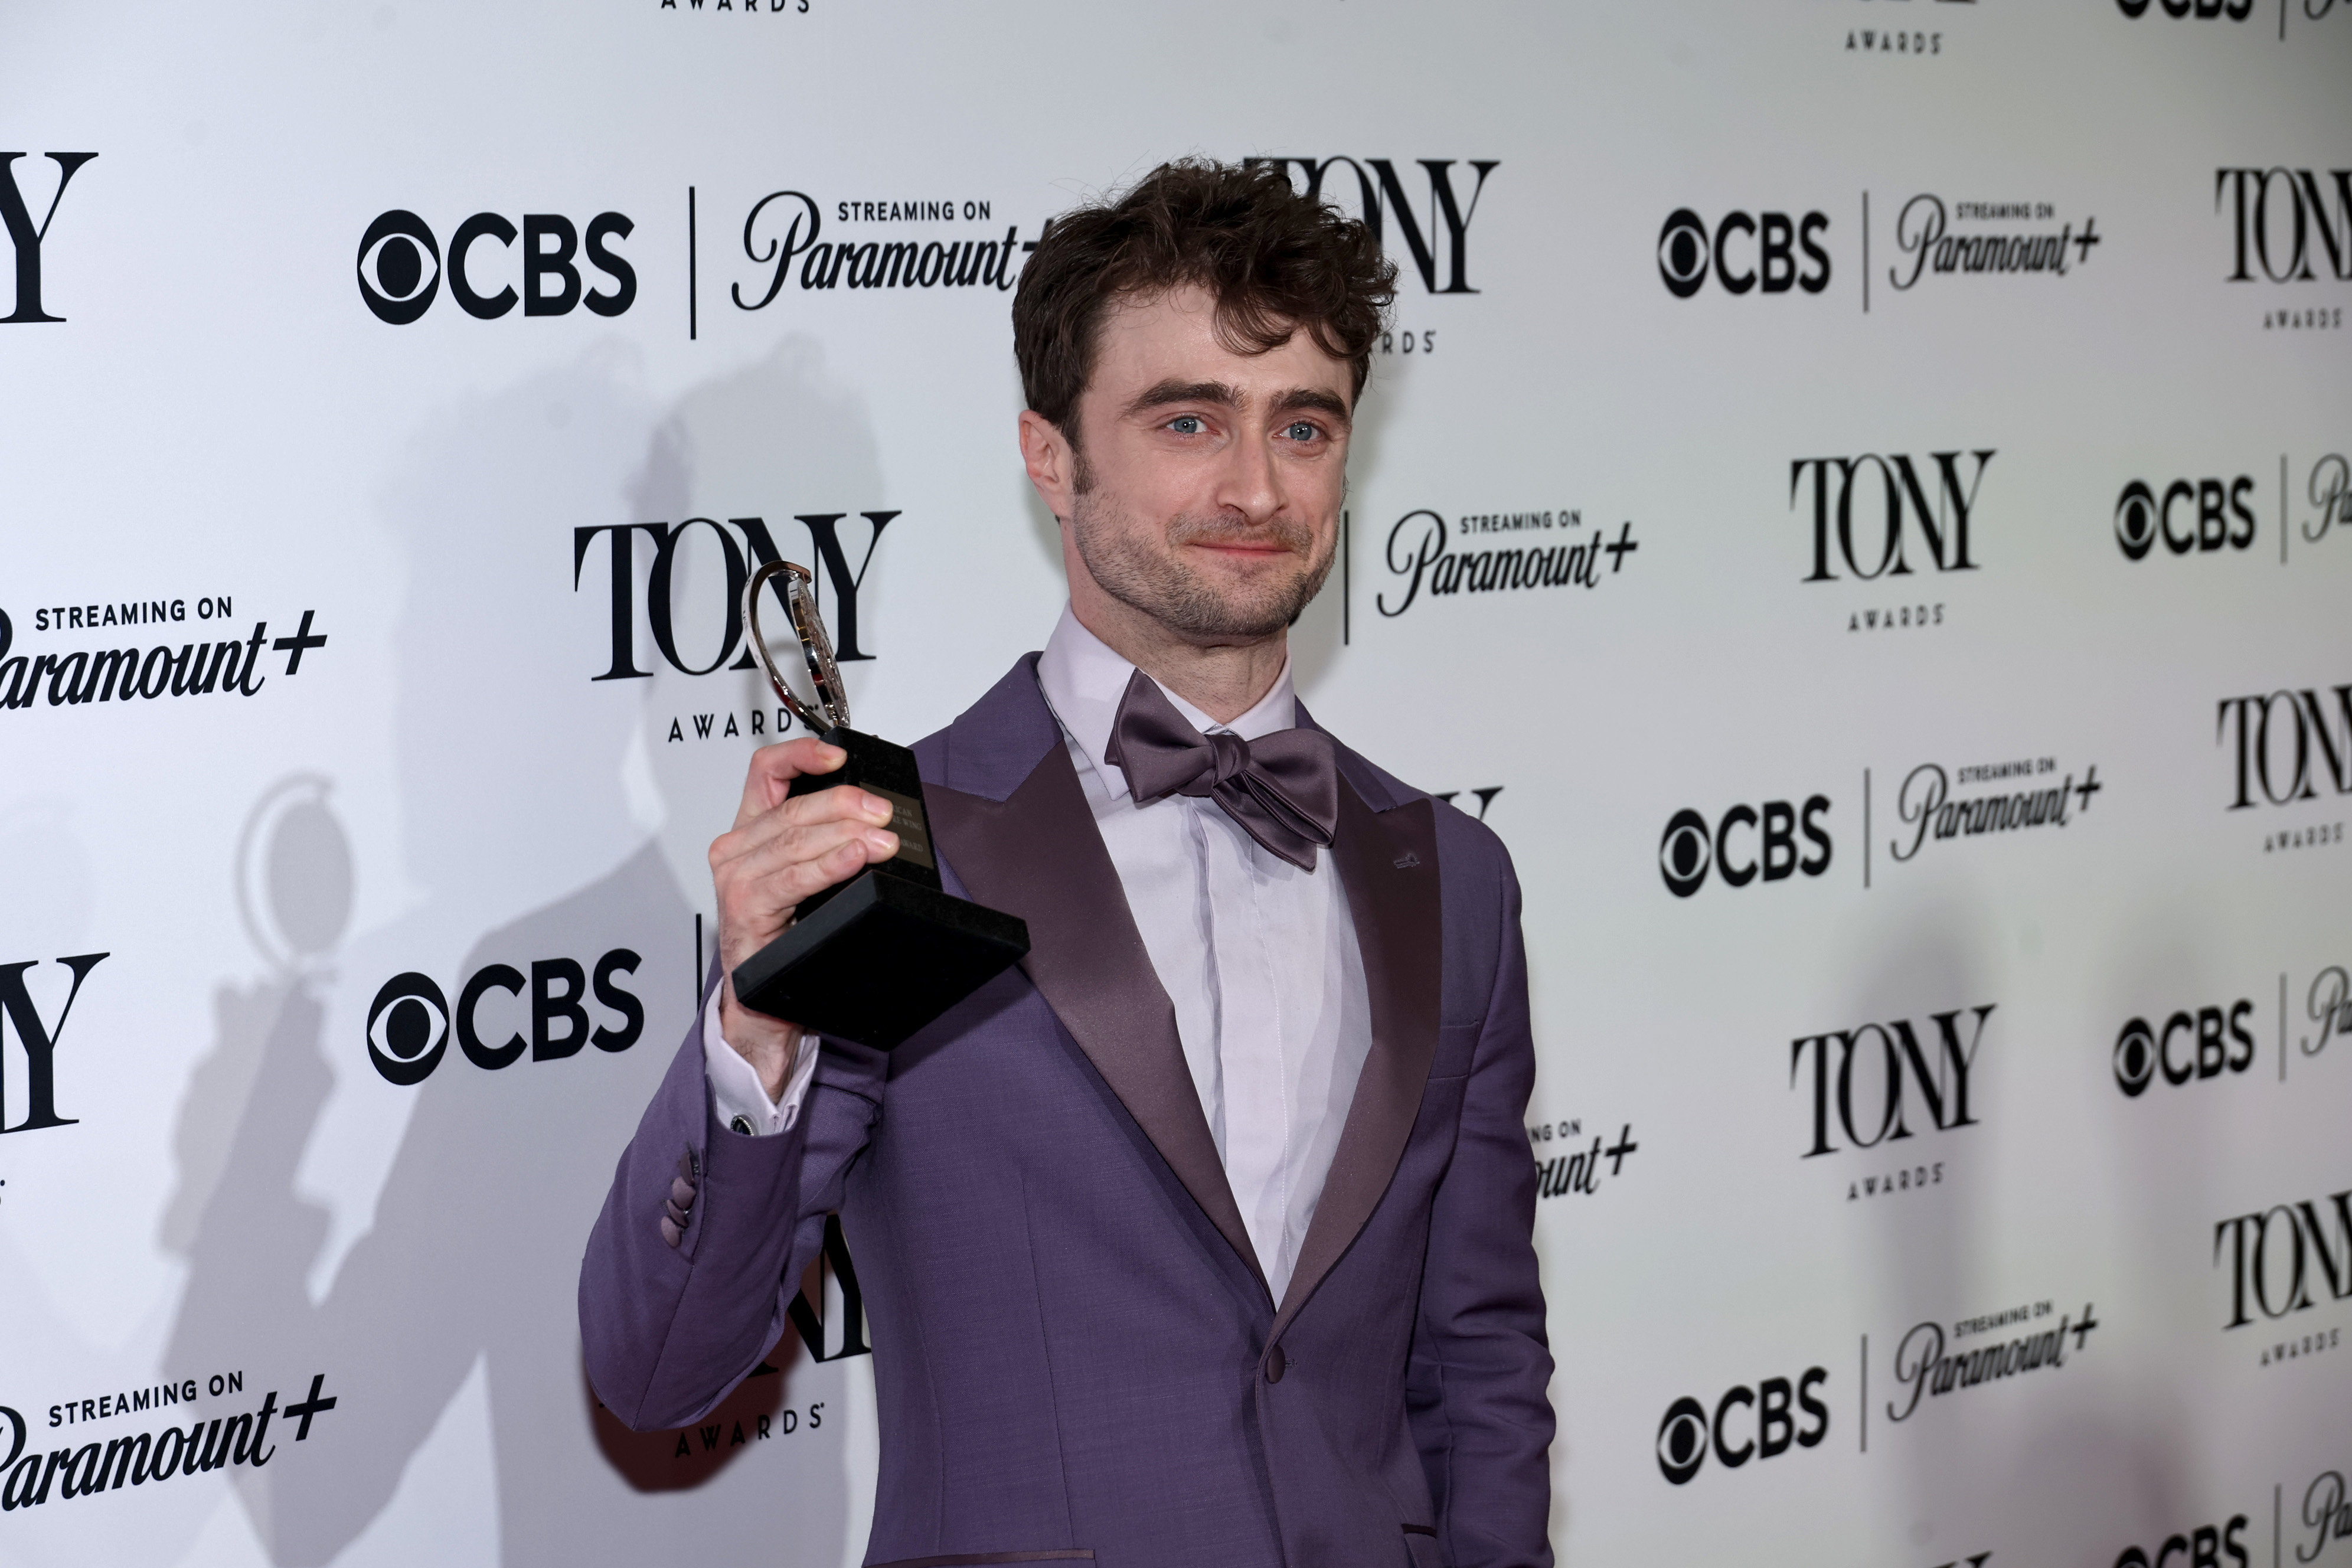 Daniel Radcliffe holding his Tony Award while dressed in a sharp suit with a bowtie at the Tony Awards event backdrop